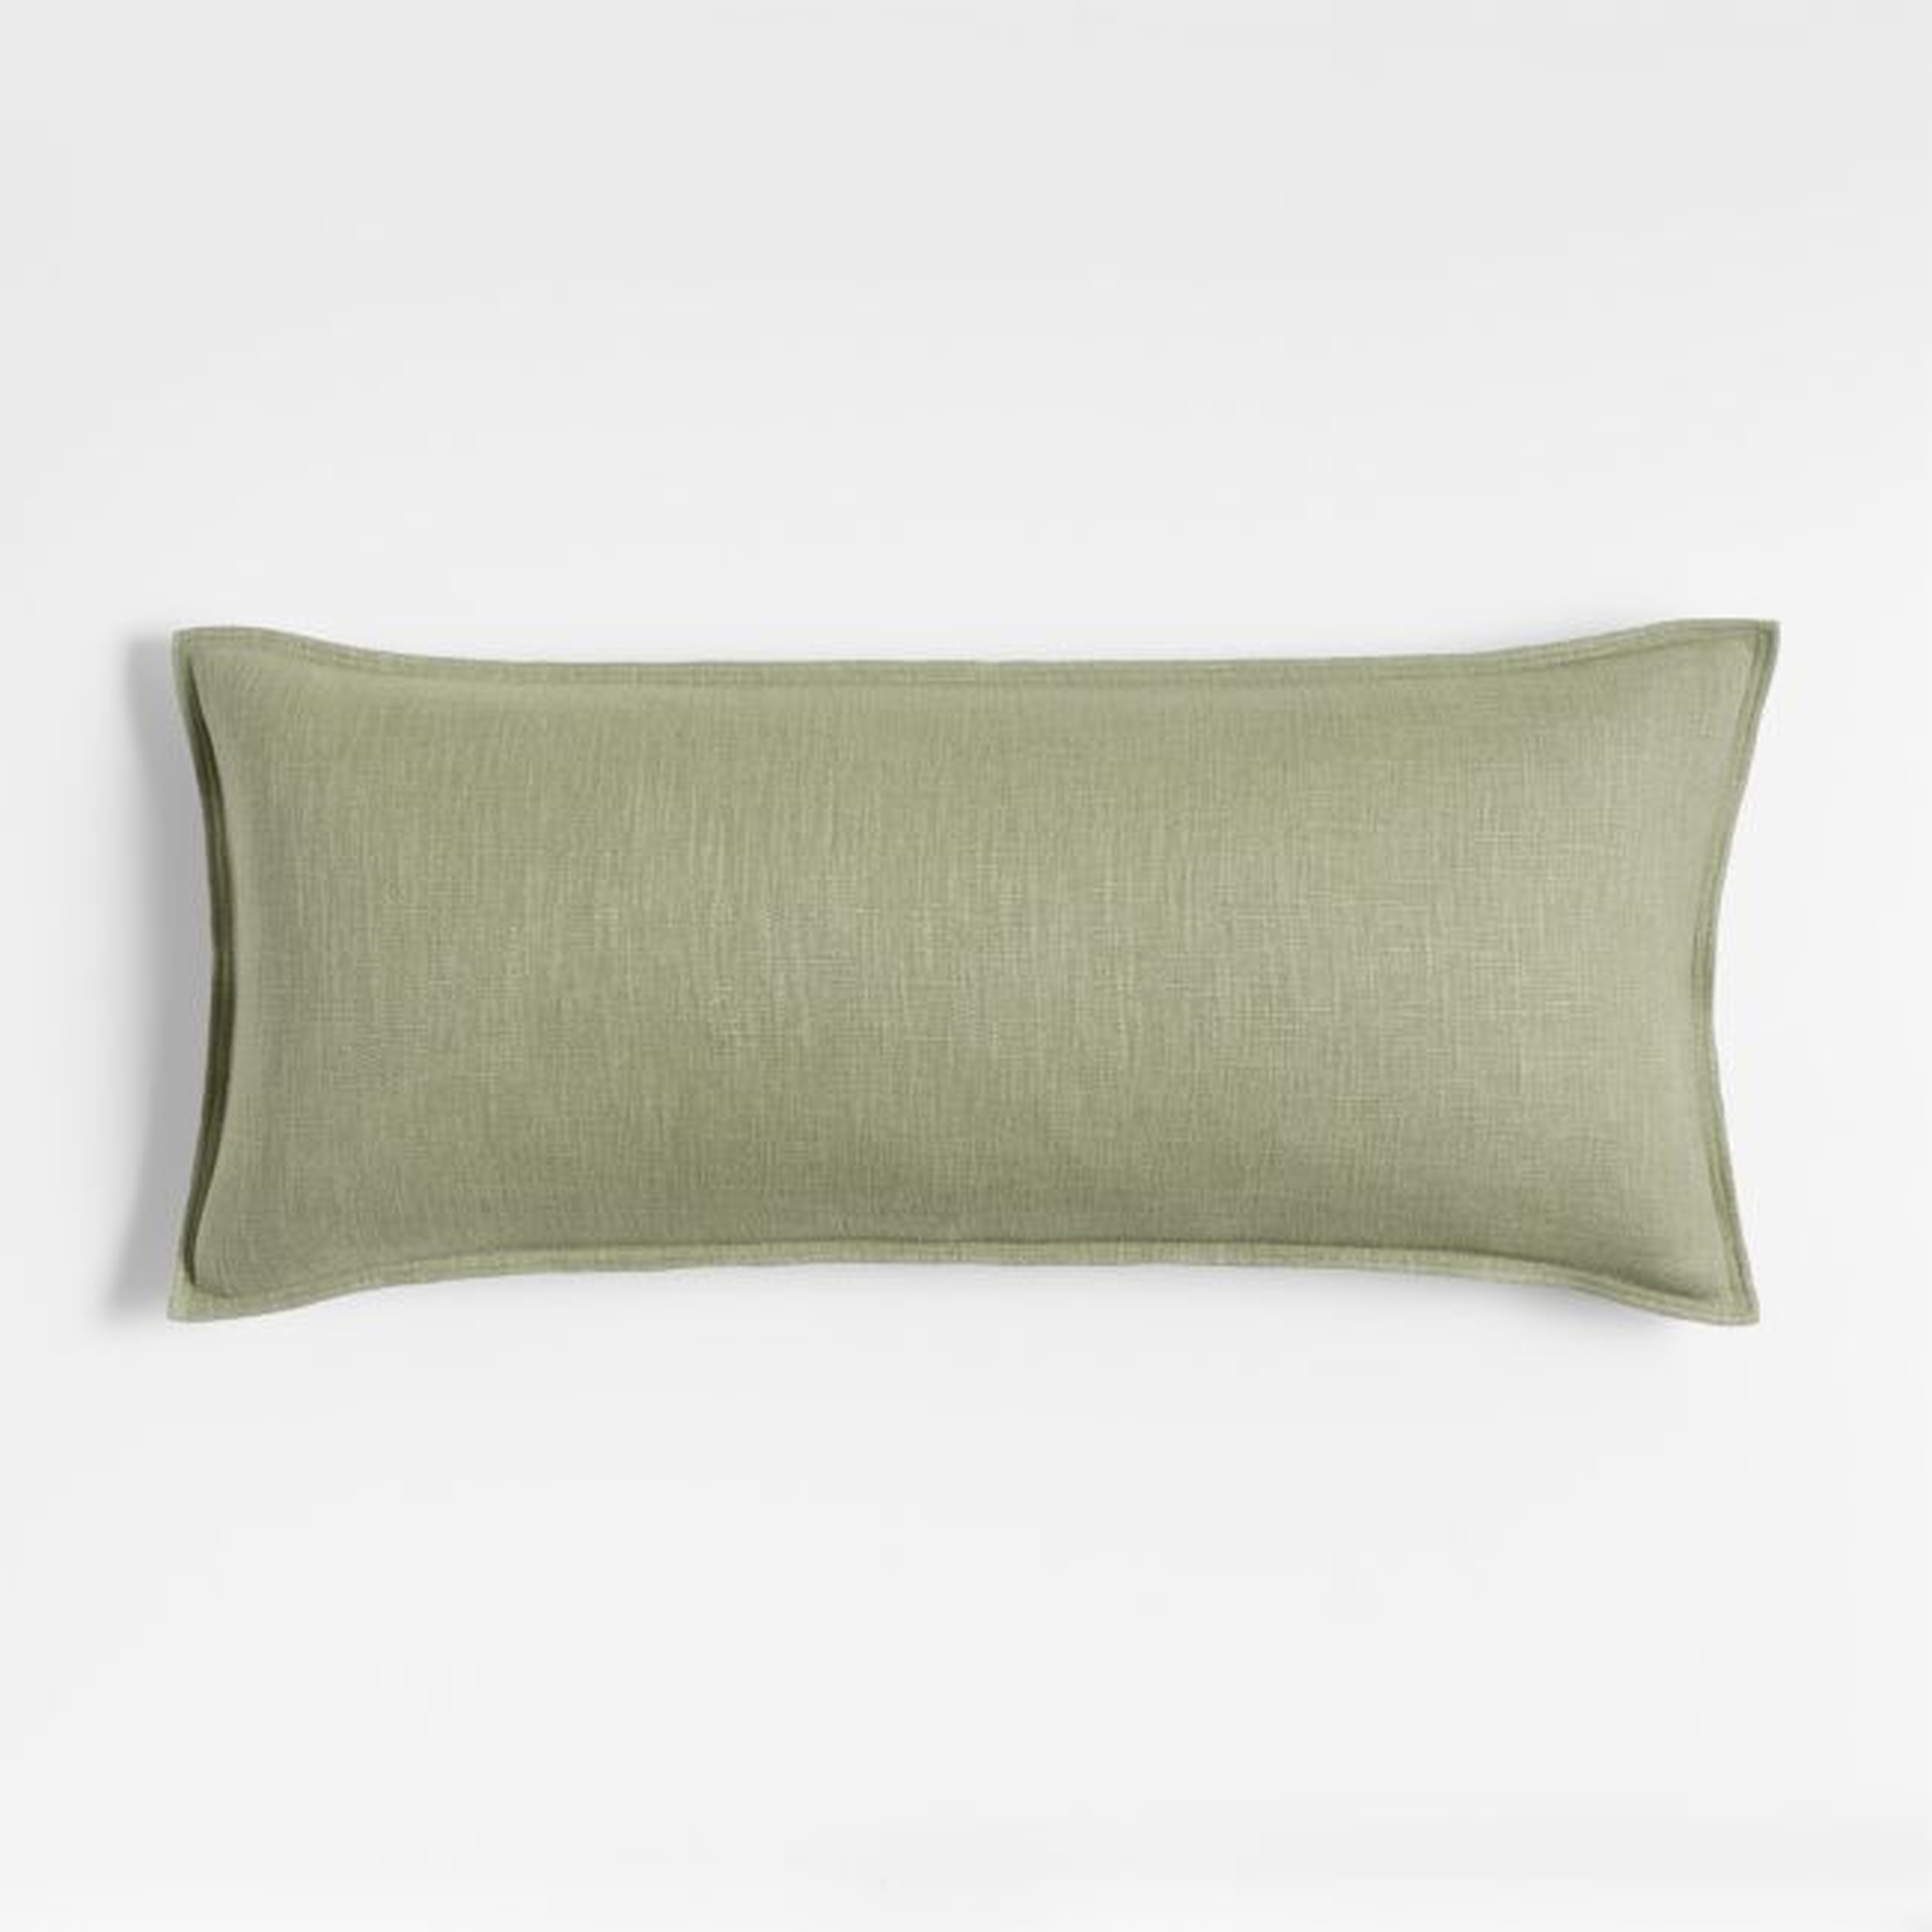 Sage 36"x16" Laundered Linen Throw Pillow Cover - Crate and Barrel